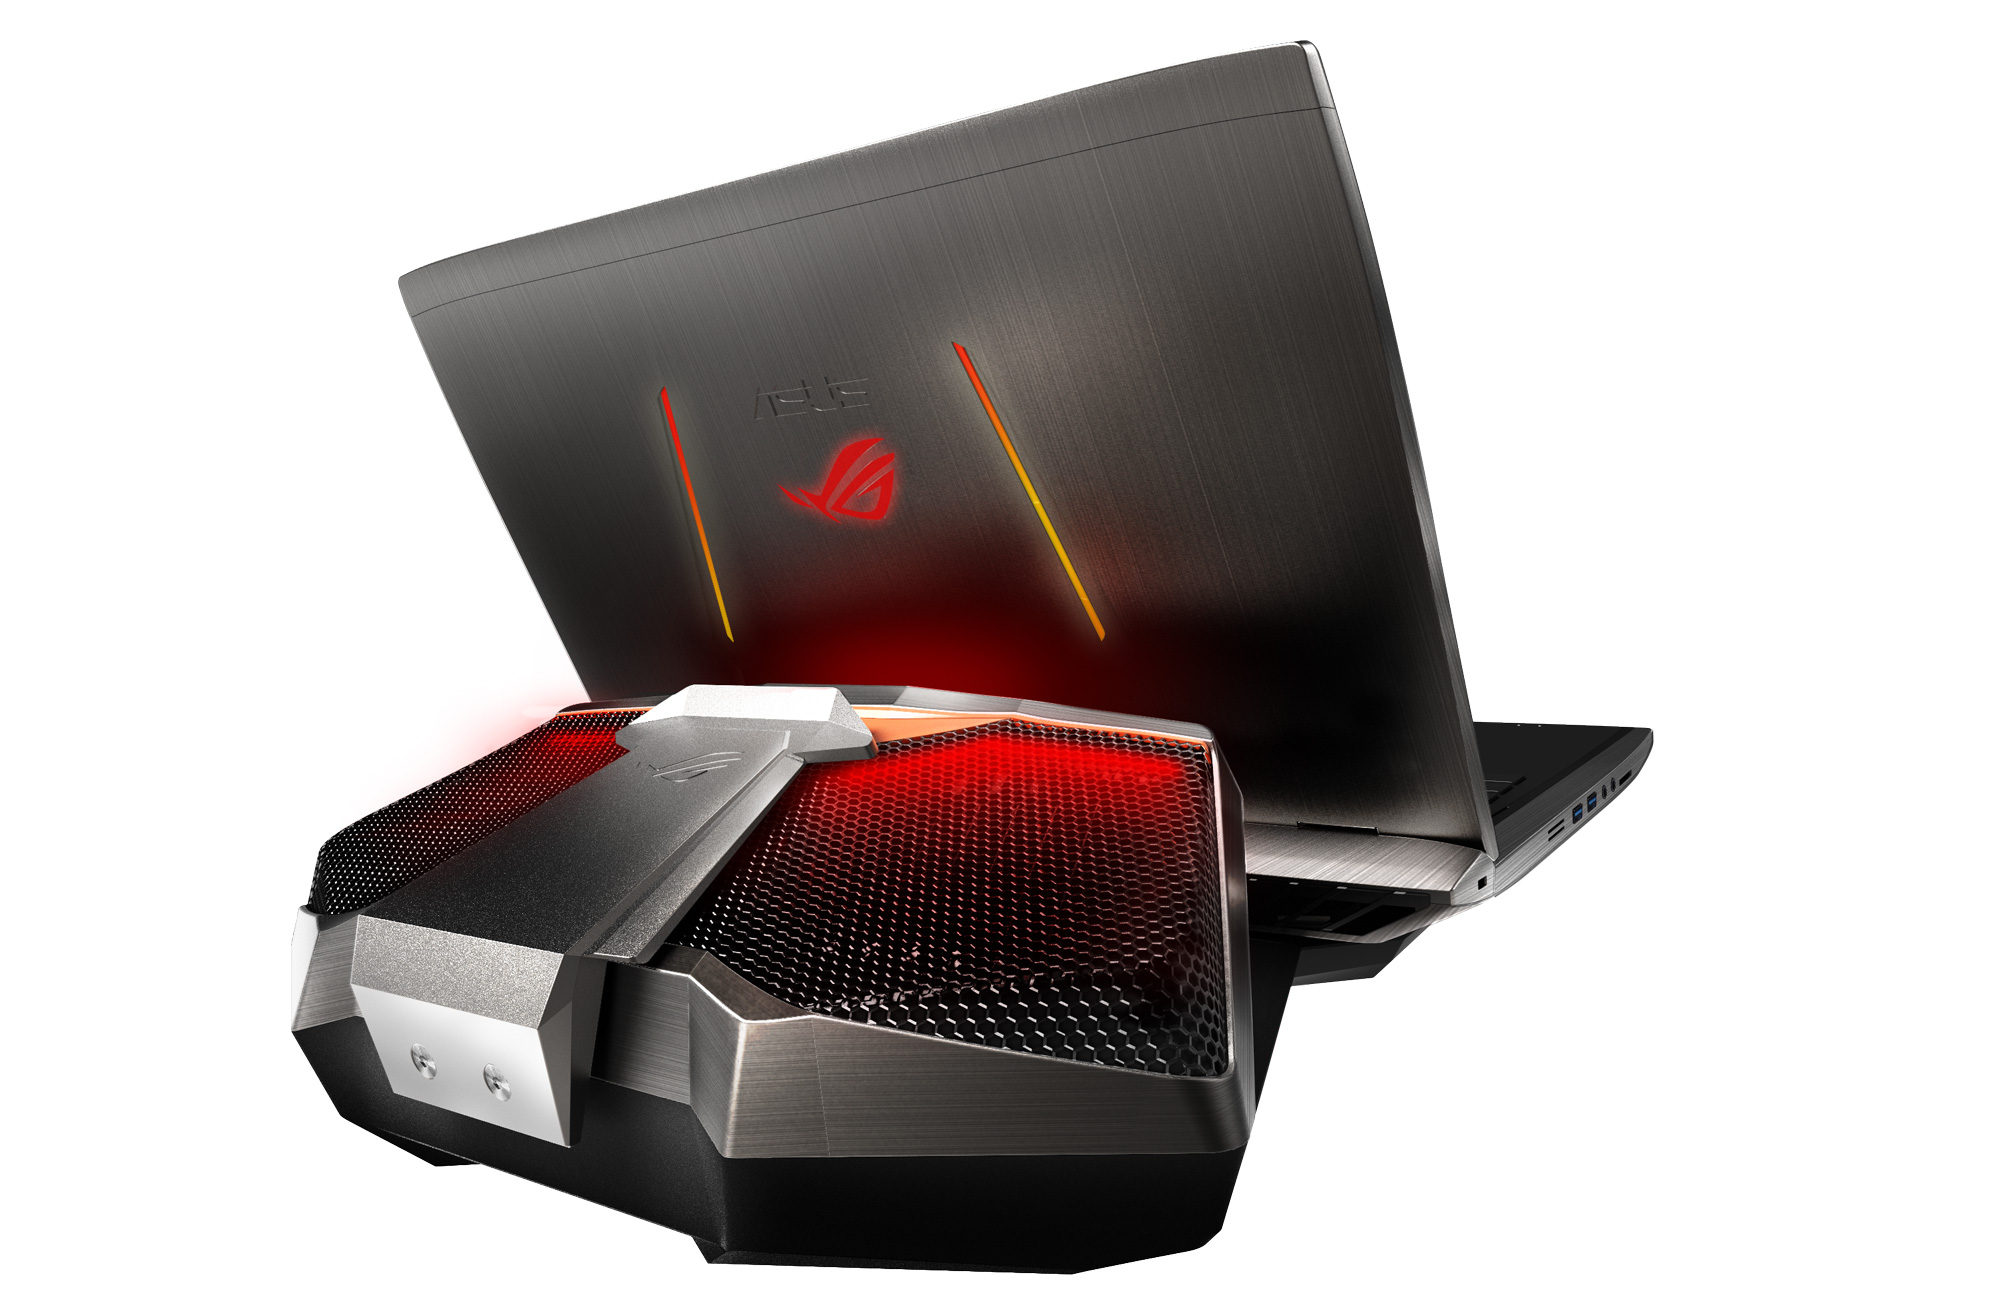 ASUS ROG unveils new lineup at IFA 2015 29